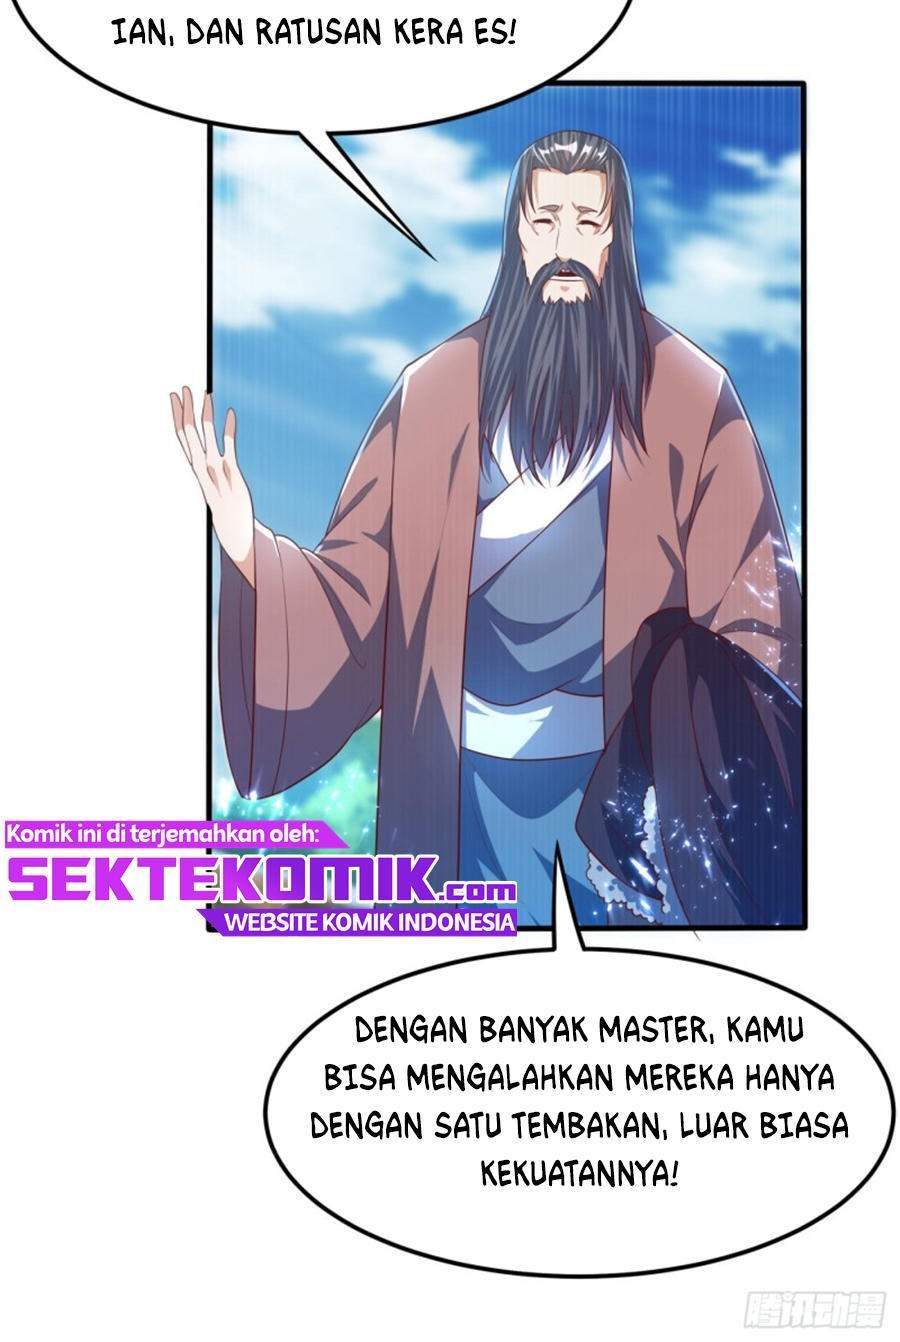 Martial Inverse Chapter 68